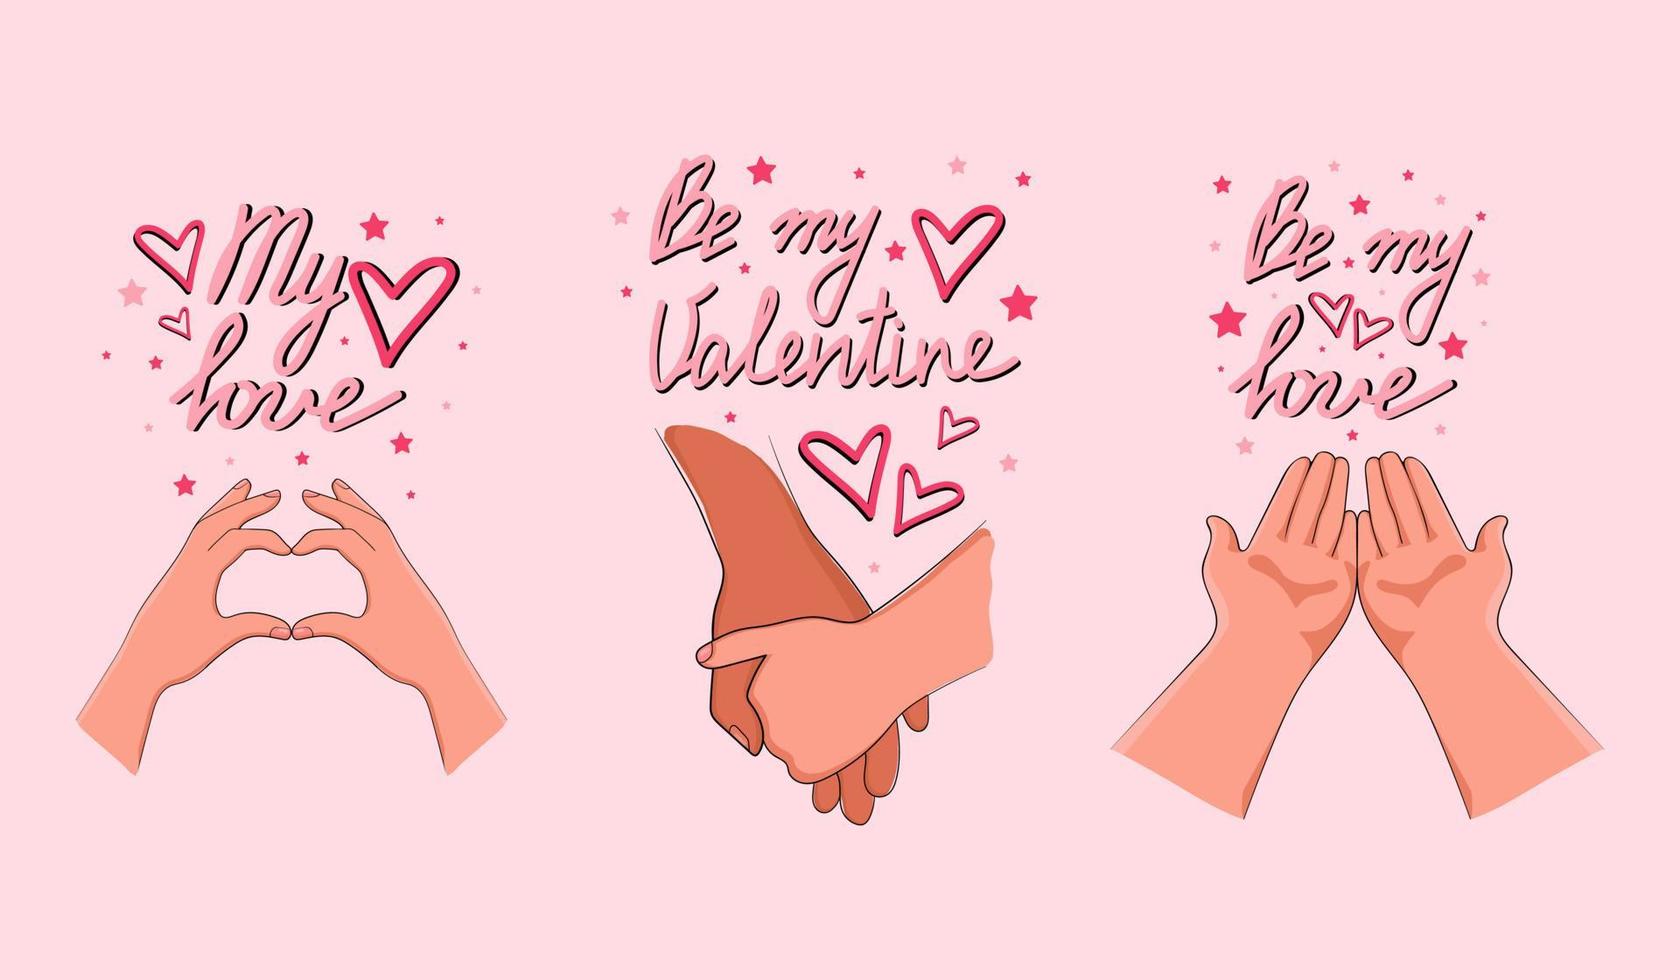 Two hands romantic symbols for valentines day set, be my valentines text. Vector illustration